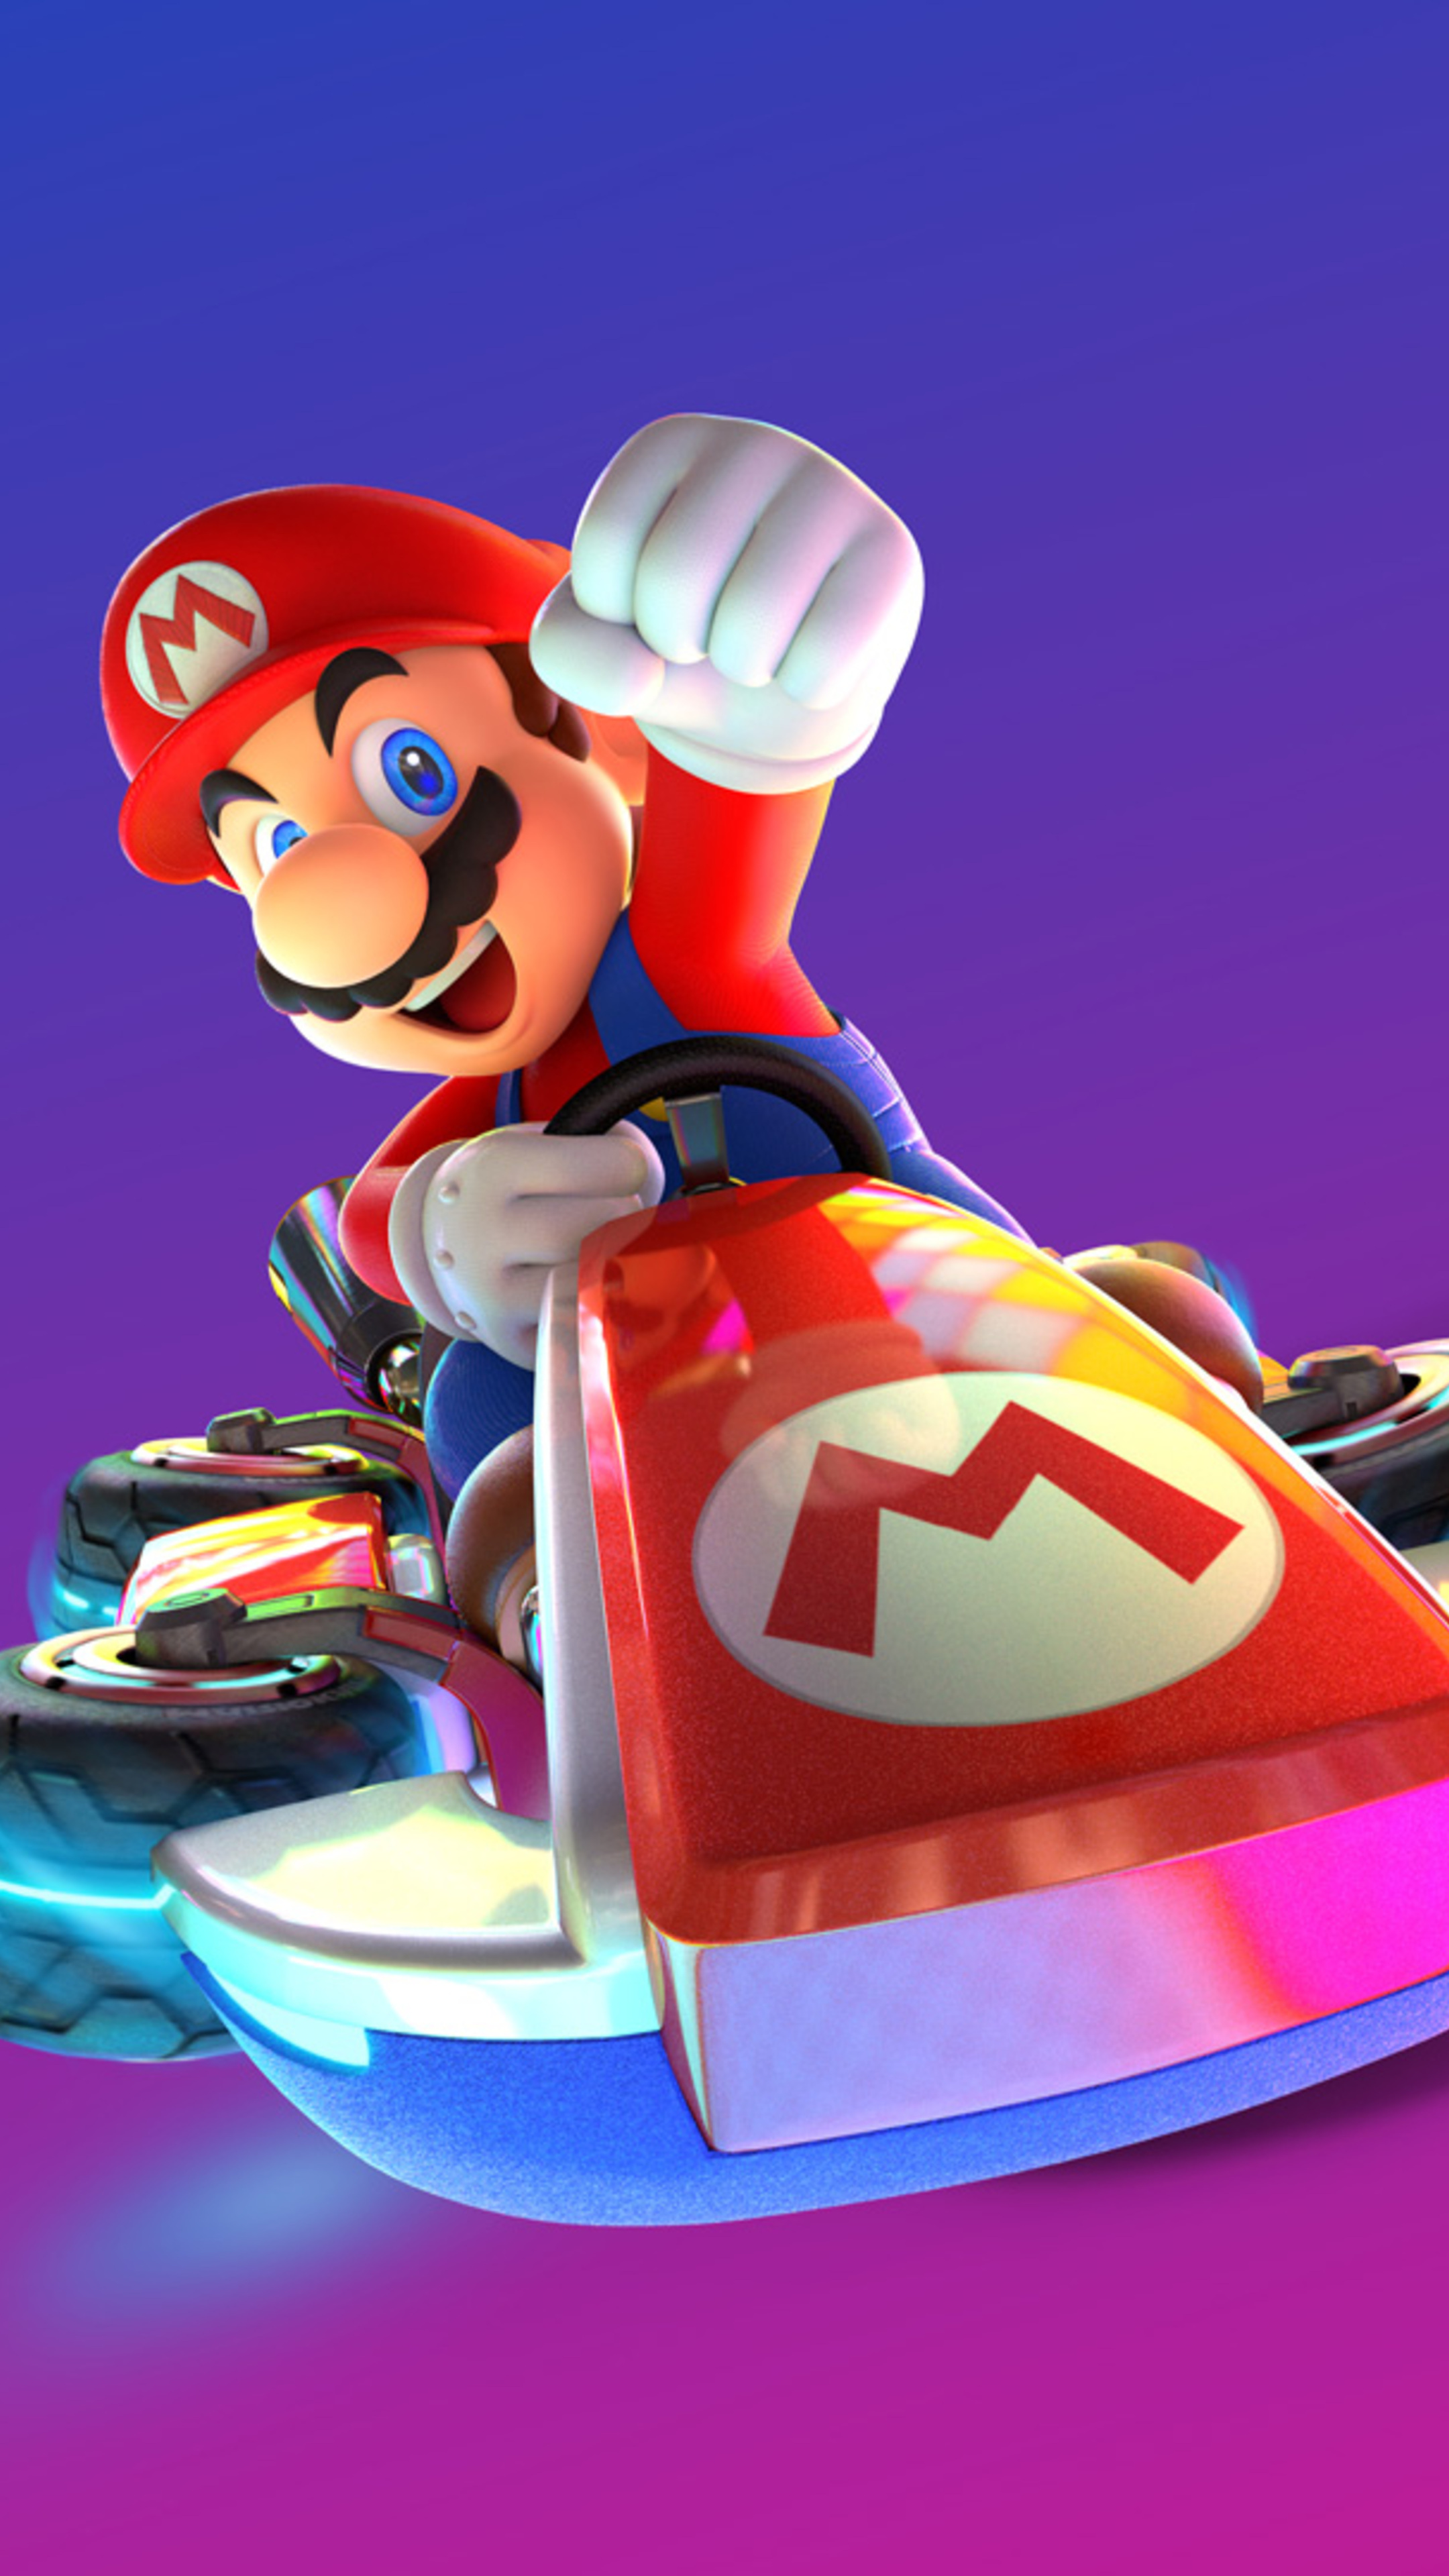 Mario Kart, Deluxe edition game, Xperia wallpapers, Gaming excitement, 2160x3840 4K Phone